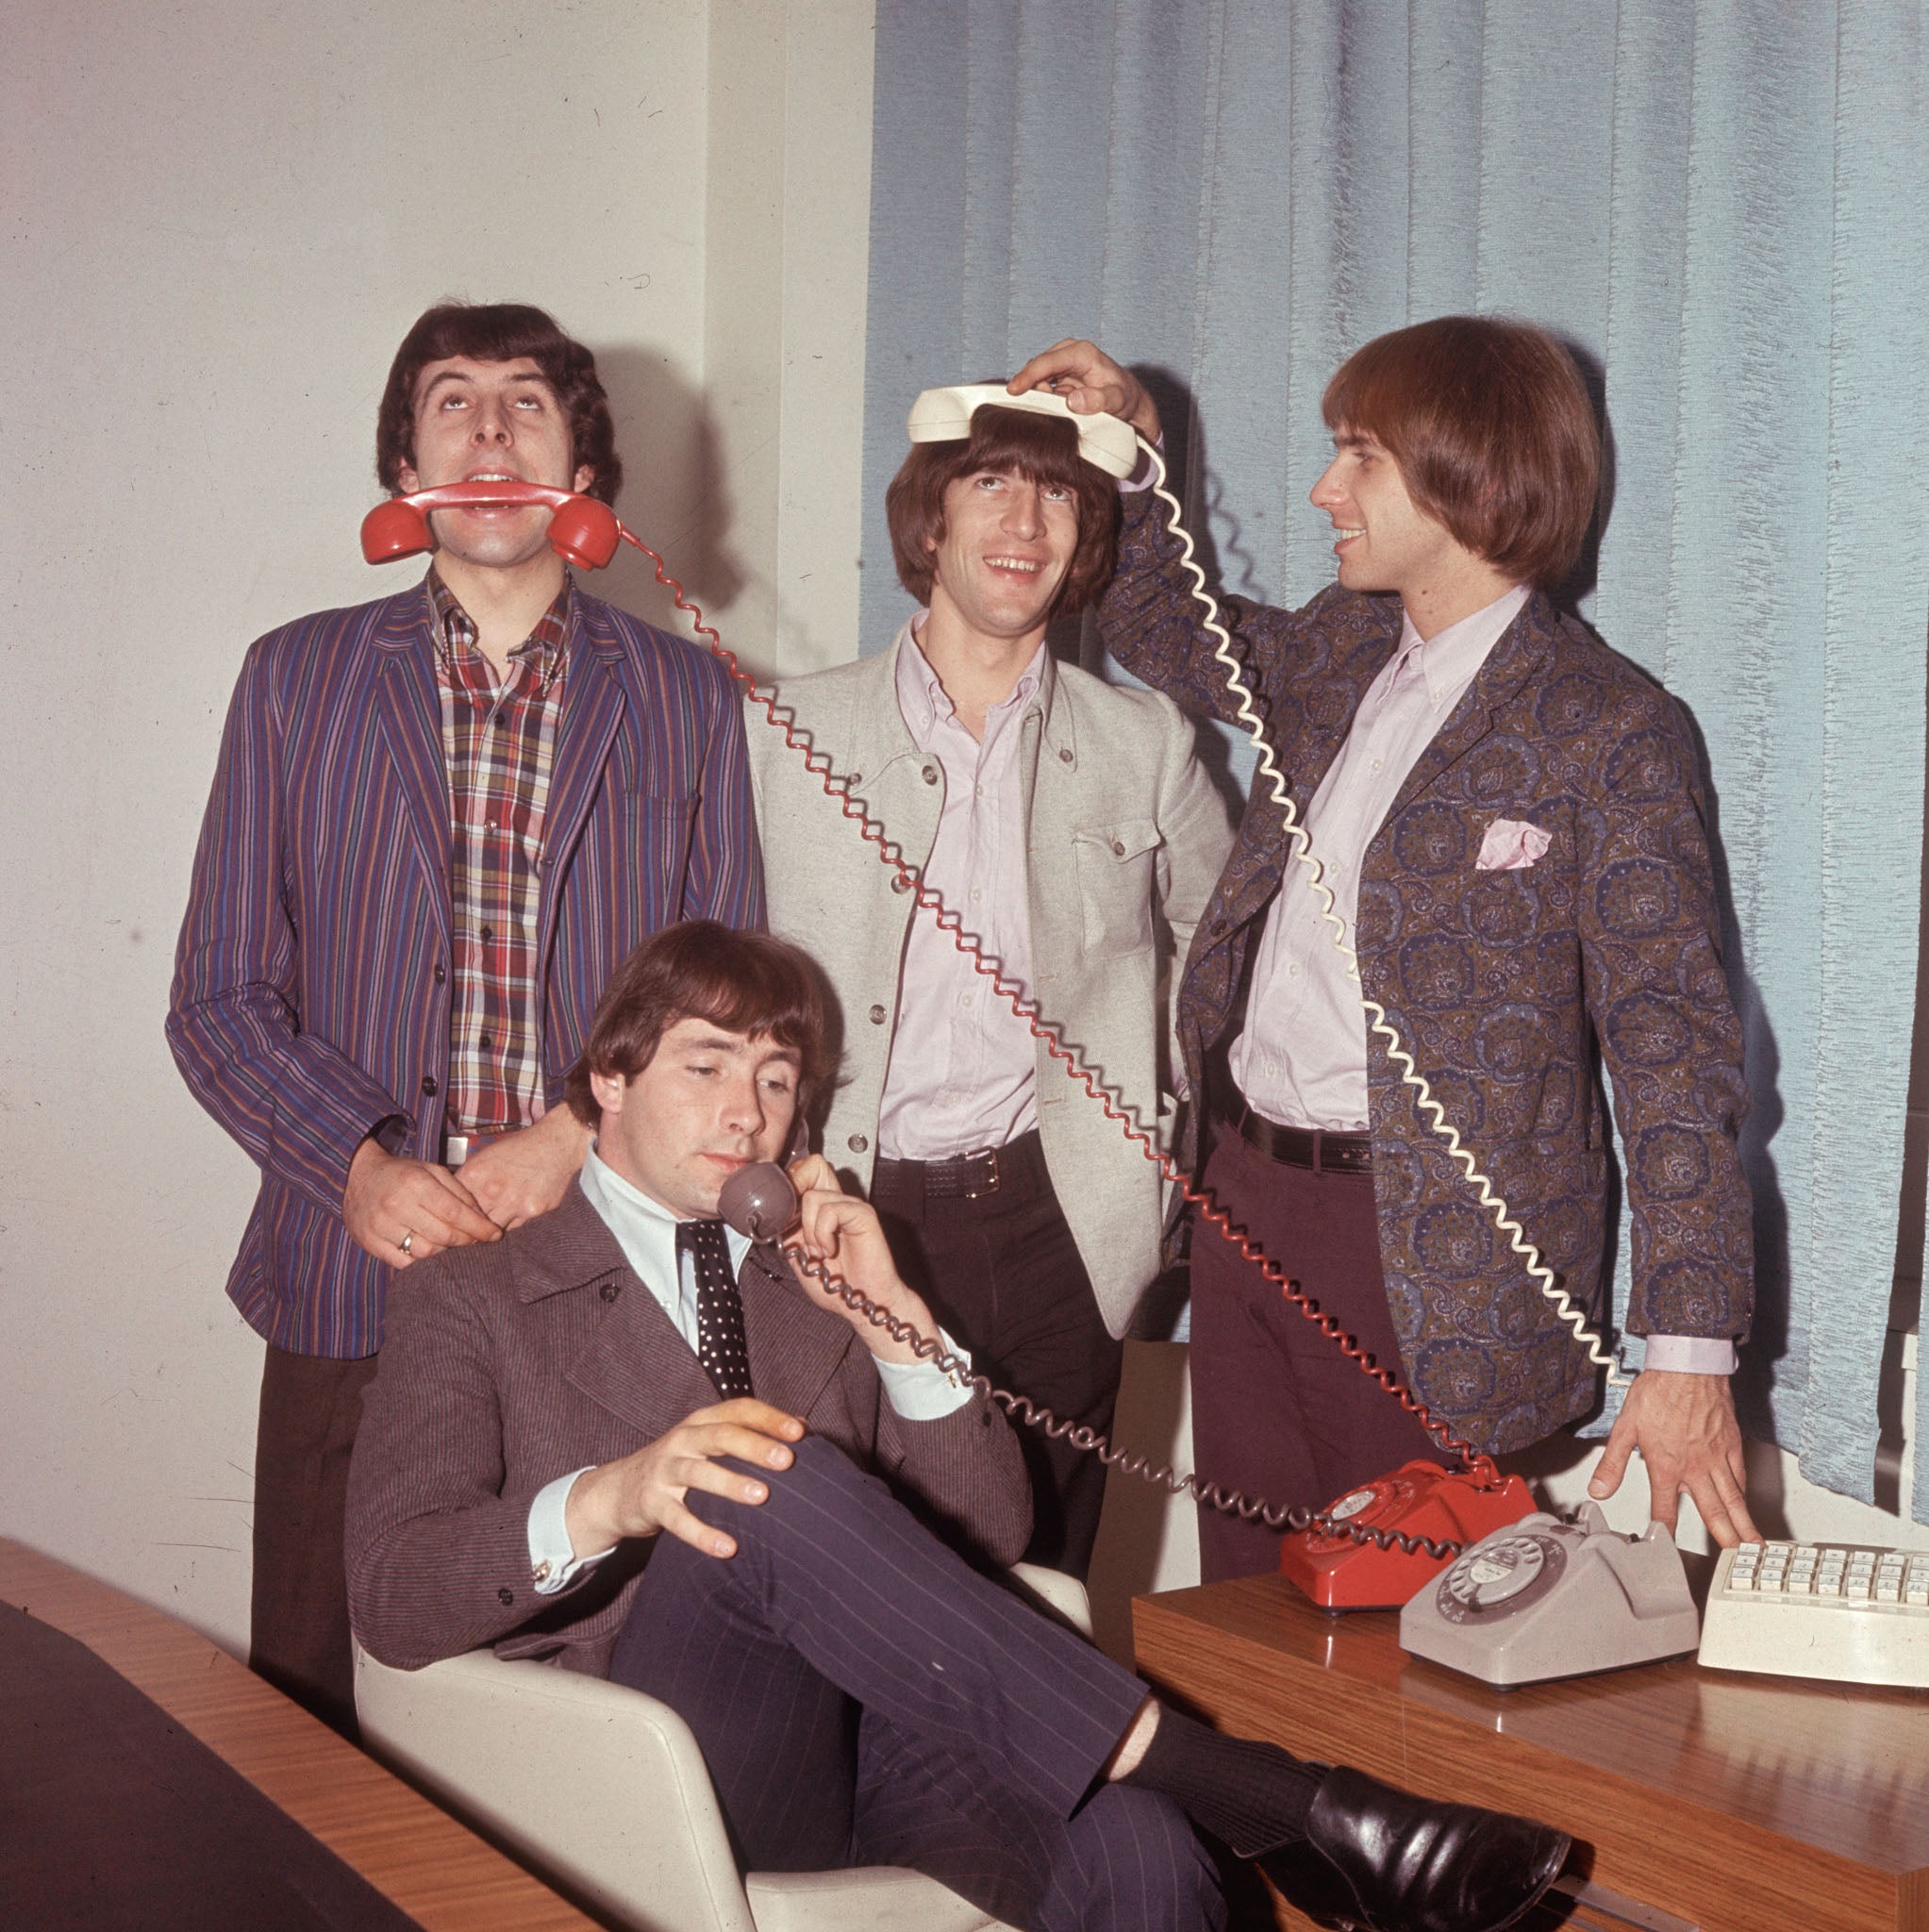 Circa 1966: The British pop band 'The Troggs', Reg Presley, (front) Chris Britton, Peter Staples and Ronnie Bond, posing with three telephones.